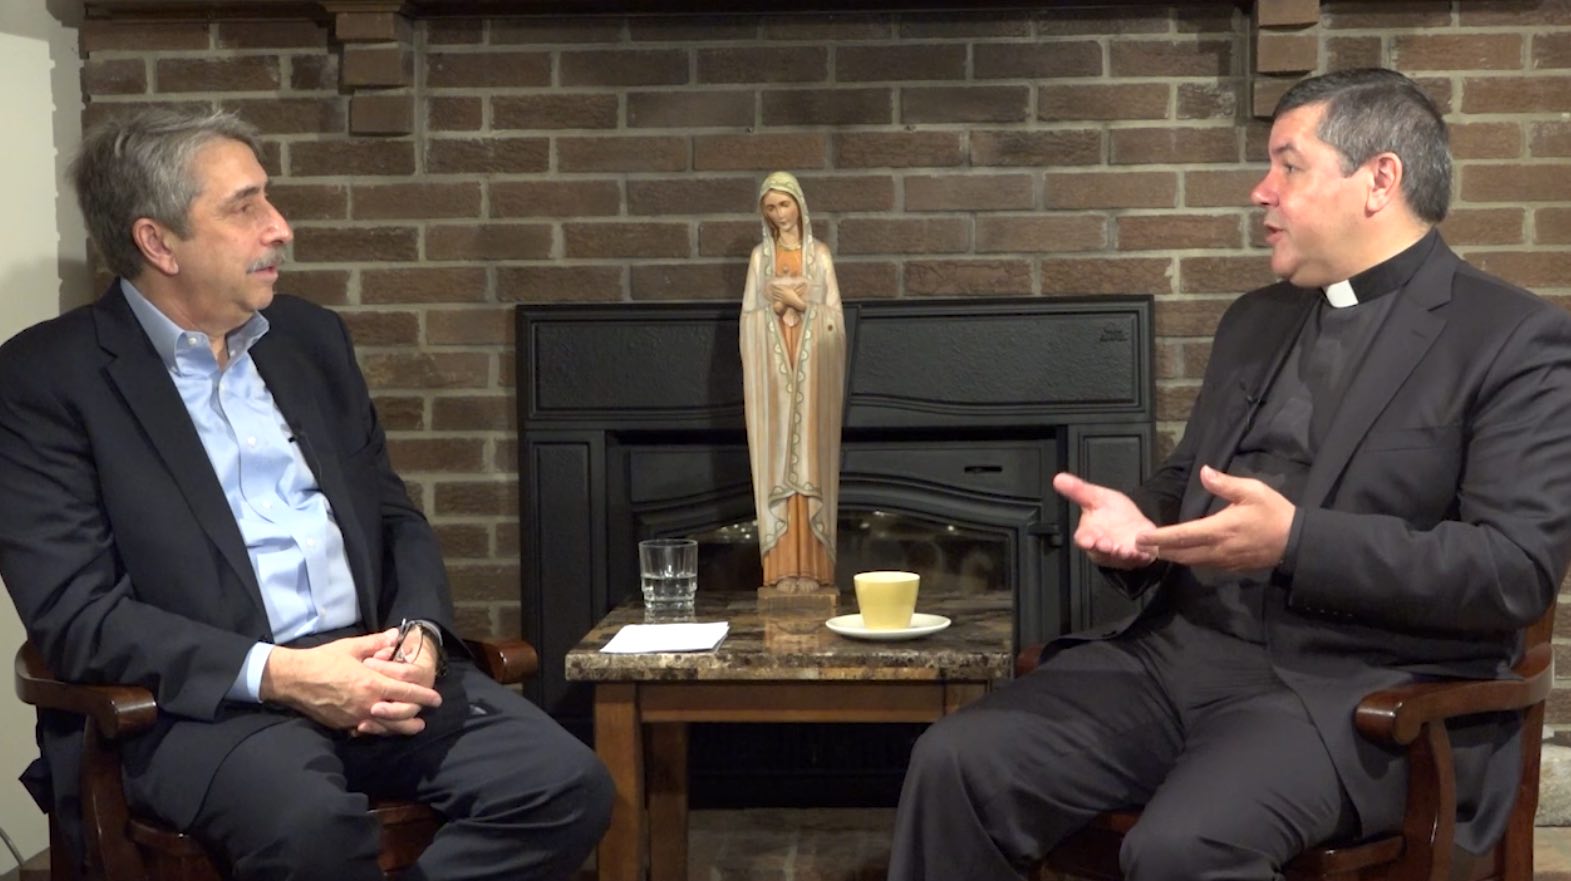 Finding new meaning in the Fatima message with David Carollo and Fr. Francisco Pereira (Part 1 of 3)